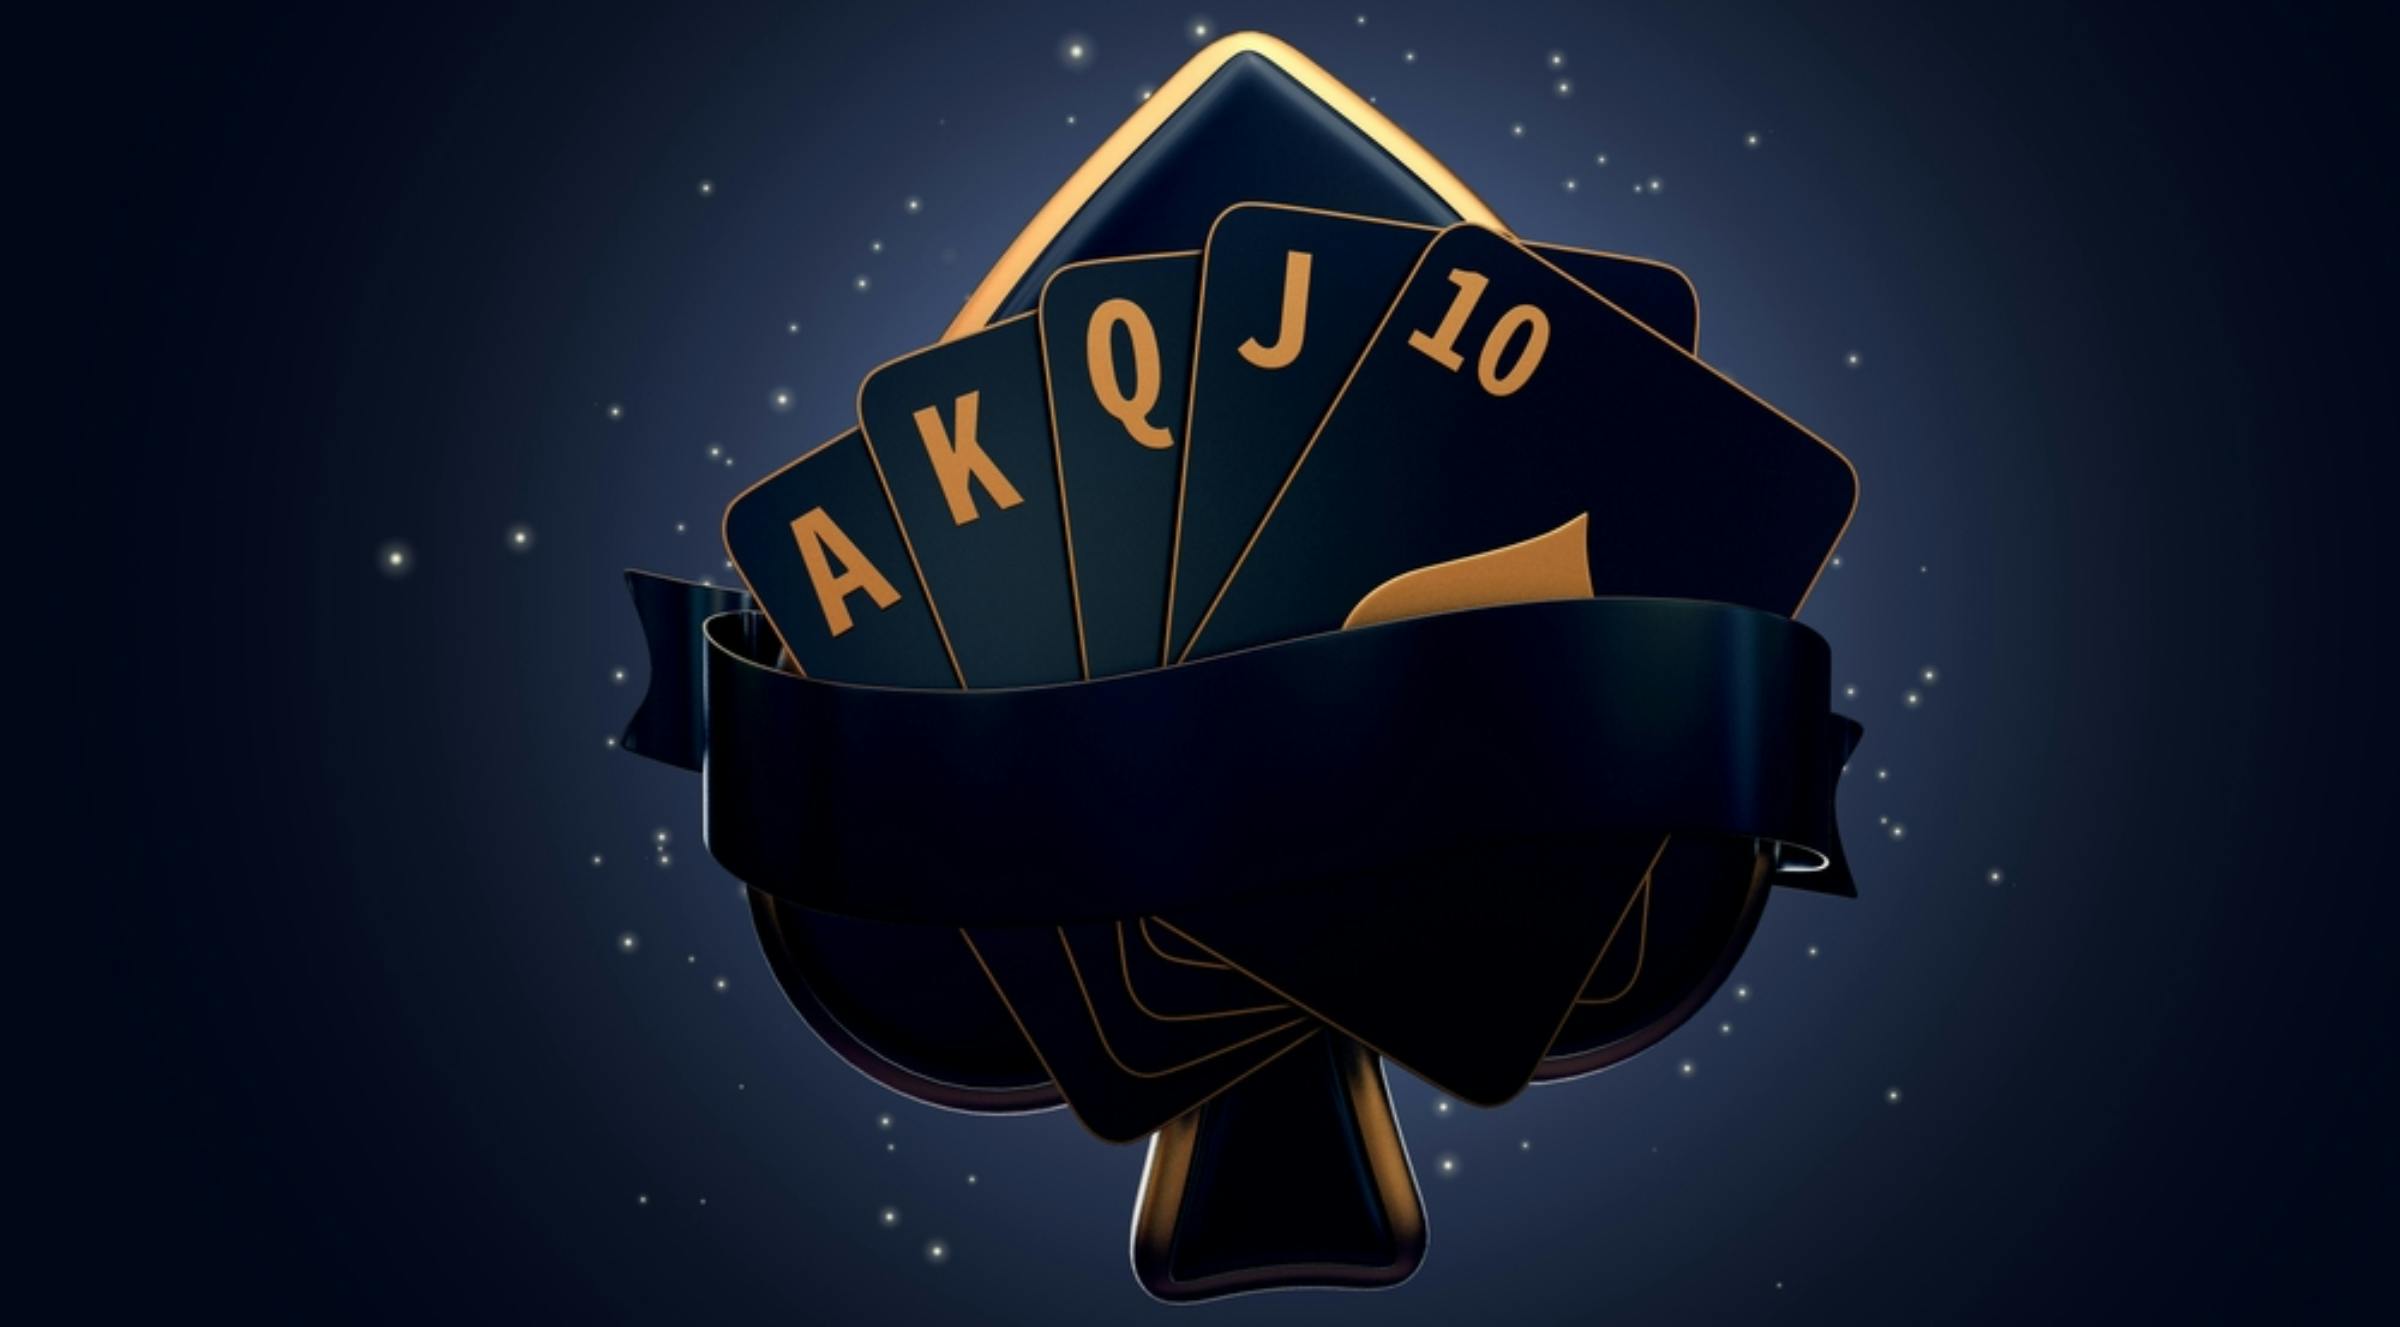 GTO and Exploitative: Can they help you win more in poker?